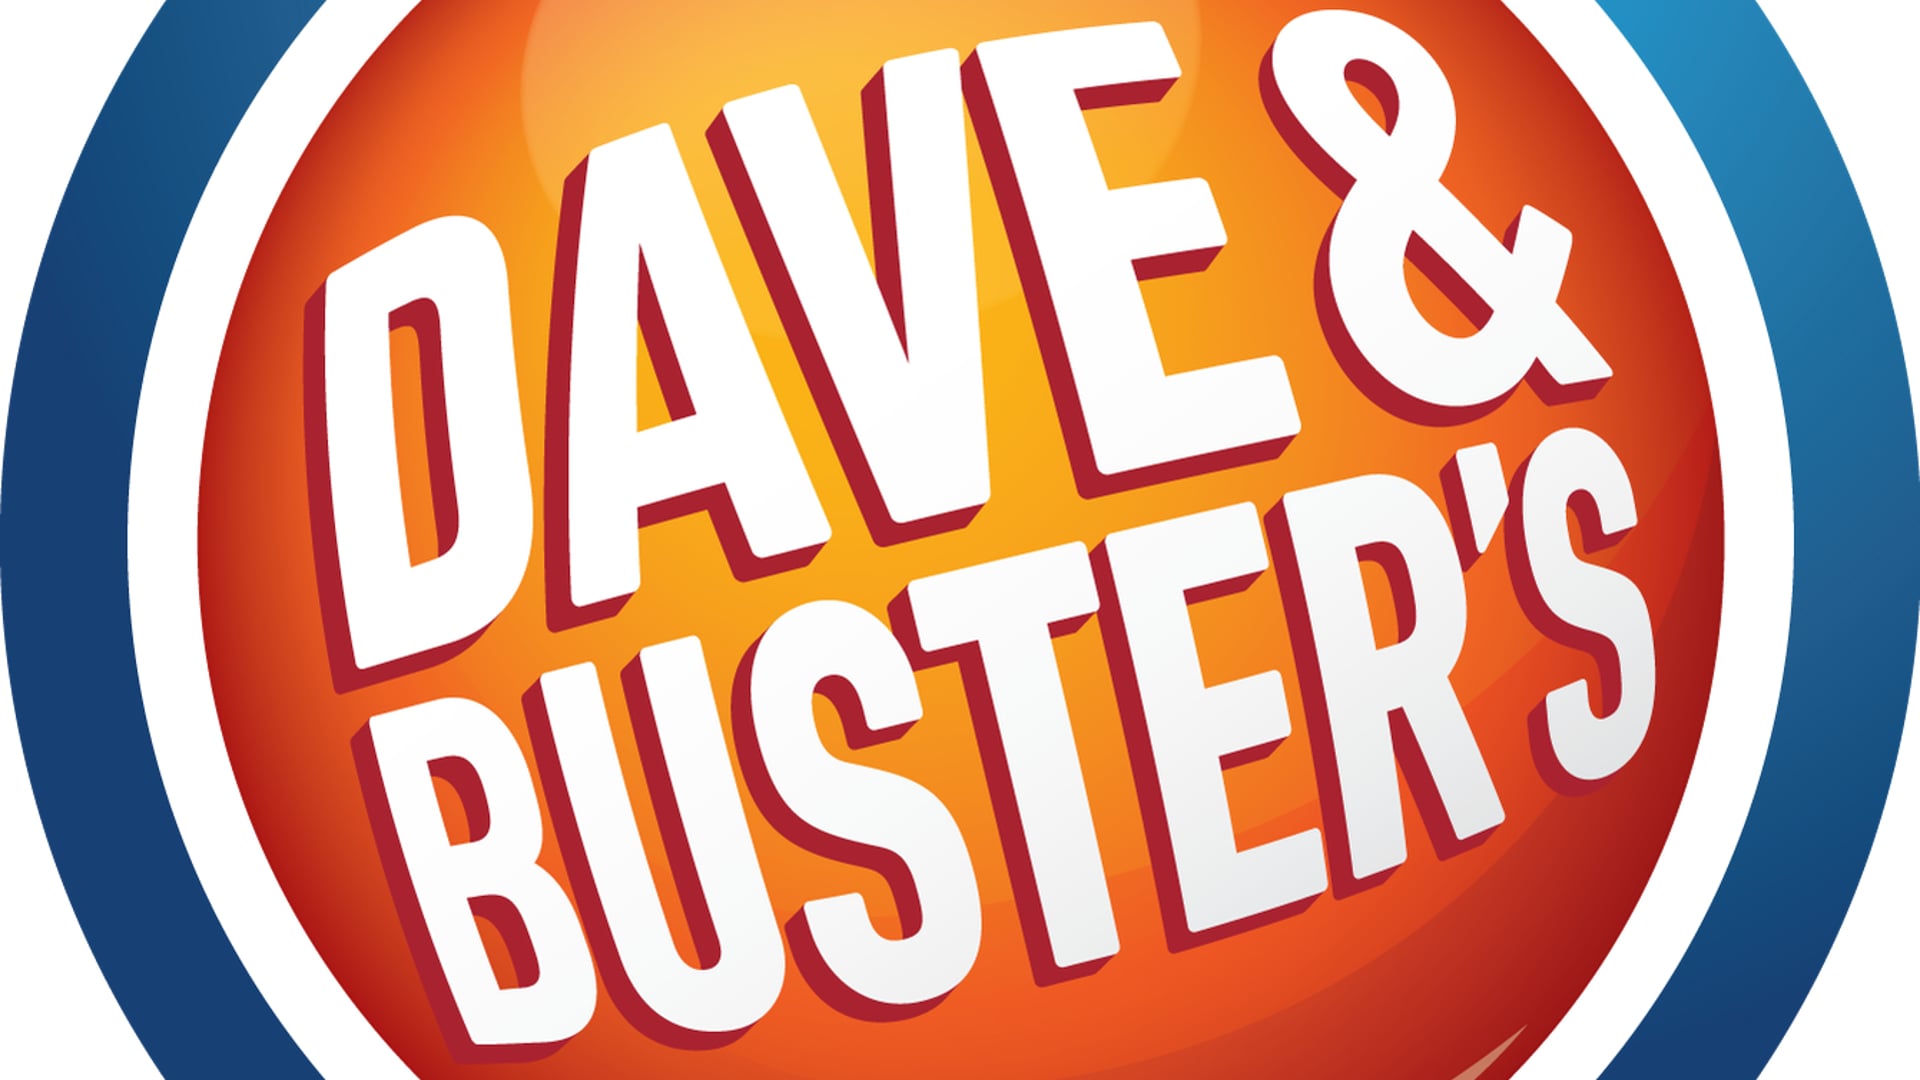 Dave&Buster's TV Commercials